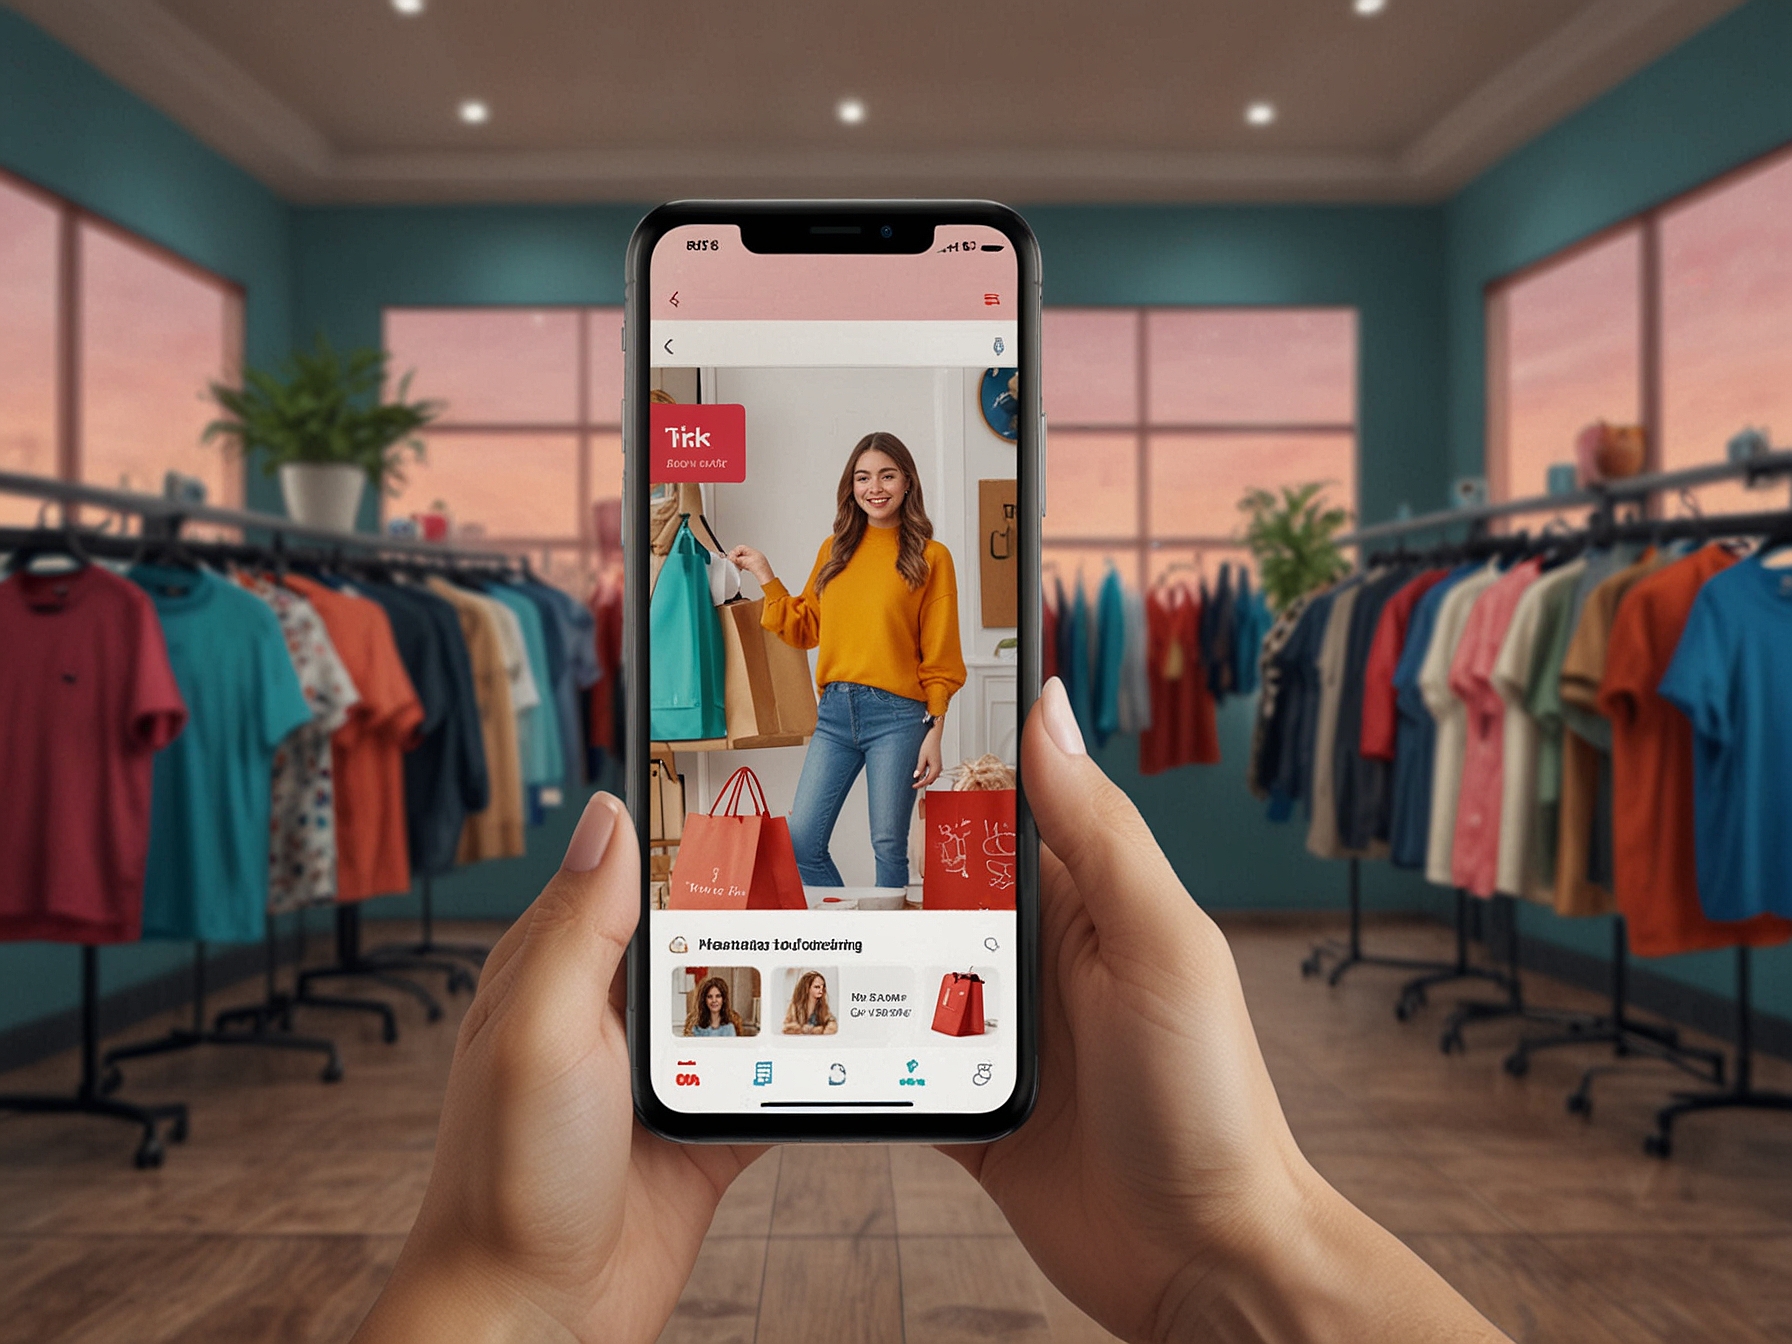 A vibrant TikTok interface showcasing a creator hosting a live shopping event, engaging with viewers, and promoting products. This illustrates TikTok's unique and seamless shopping experience.